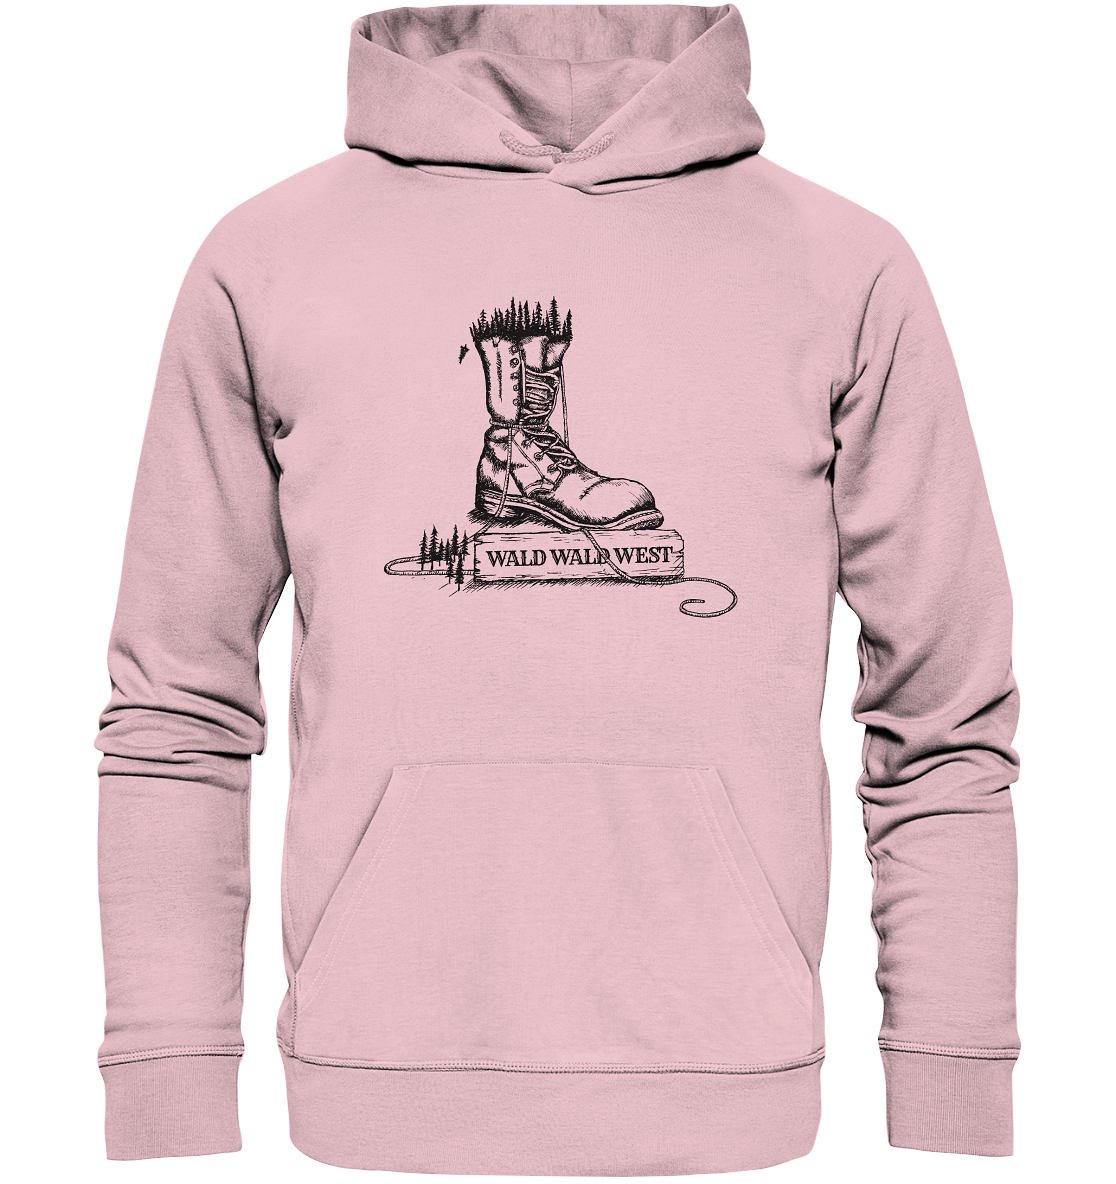 front-organic-hoodie-f2c9d0-1116x.png